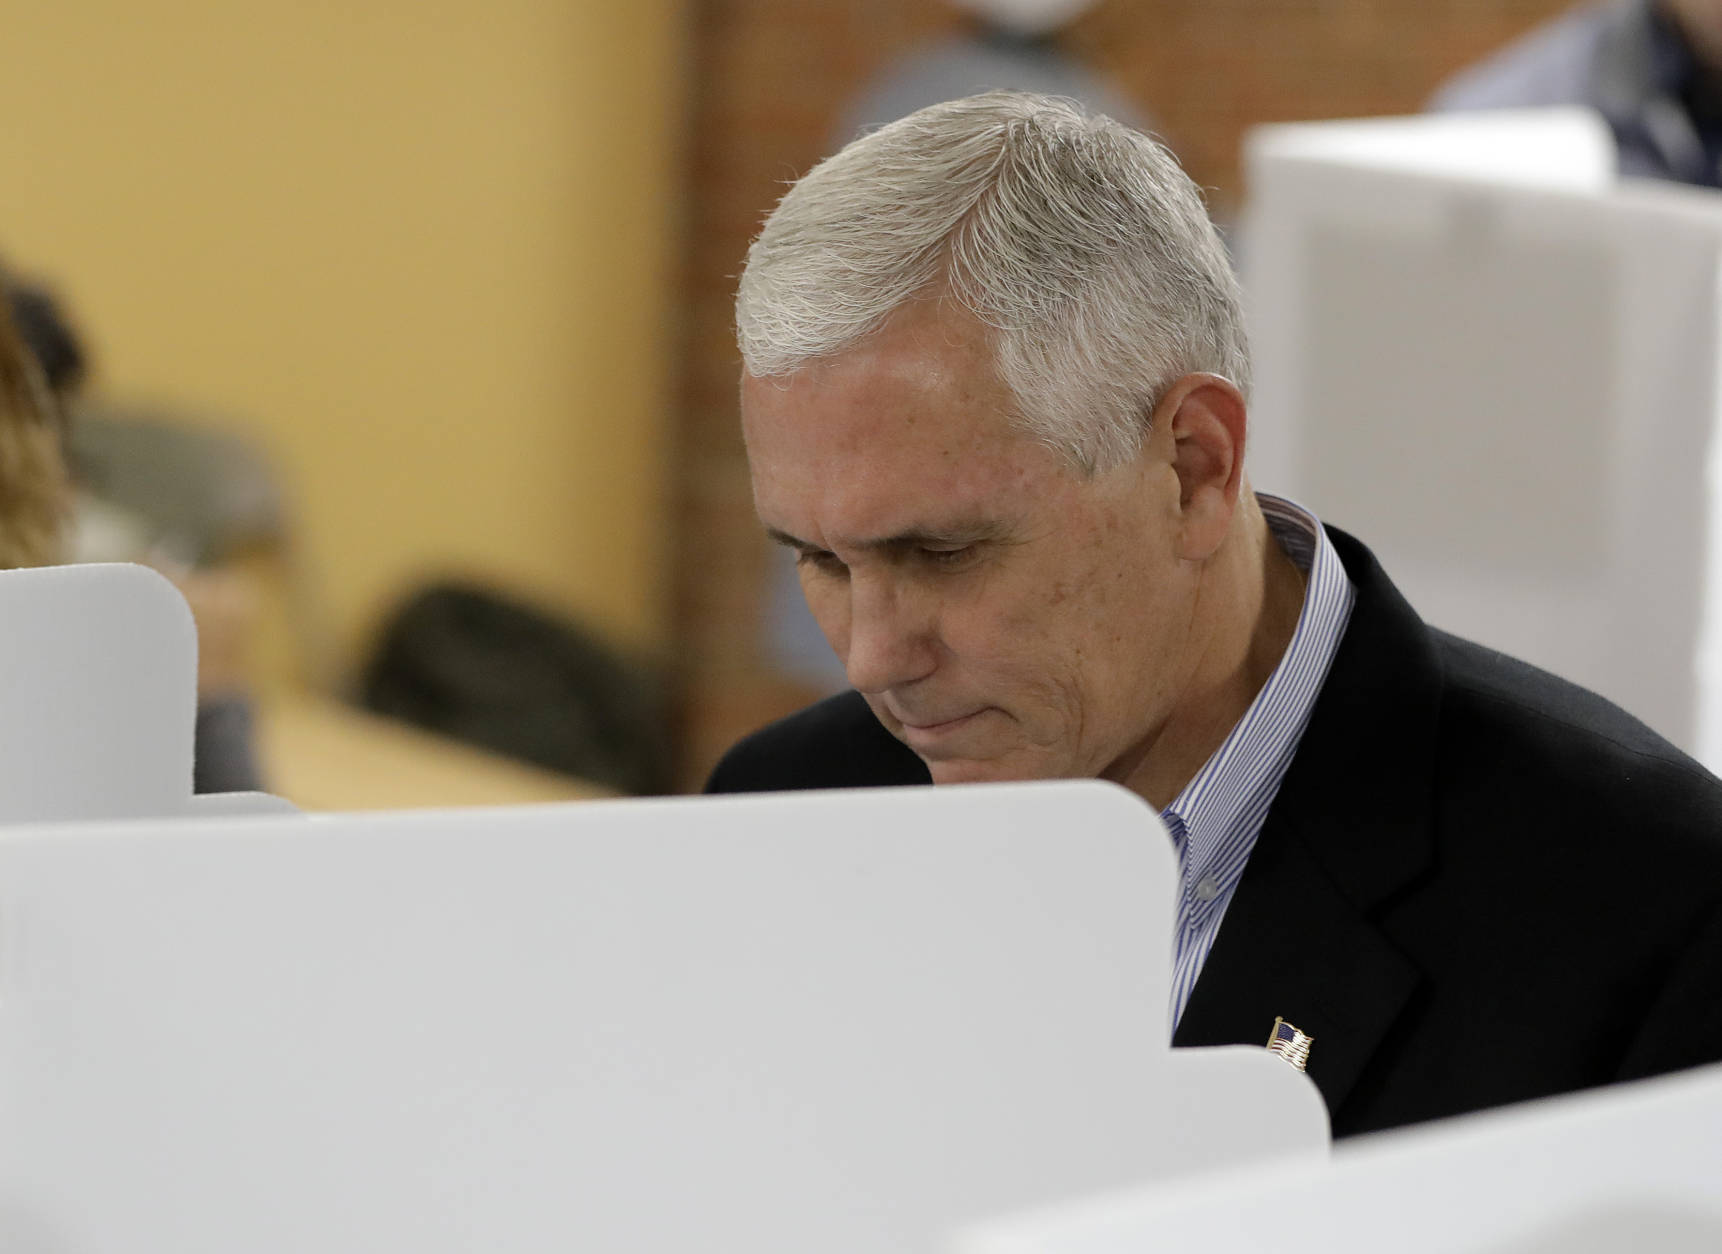 Republican vice presidential candidate, Indiana Gov. Mike Pence, cast his is ballot, Tuesday, Nov. 8, 2016, in Indianapolis. (AP Photo/Darron Cummings)